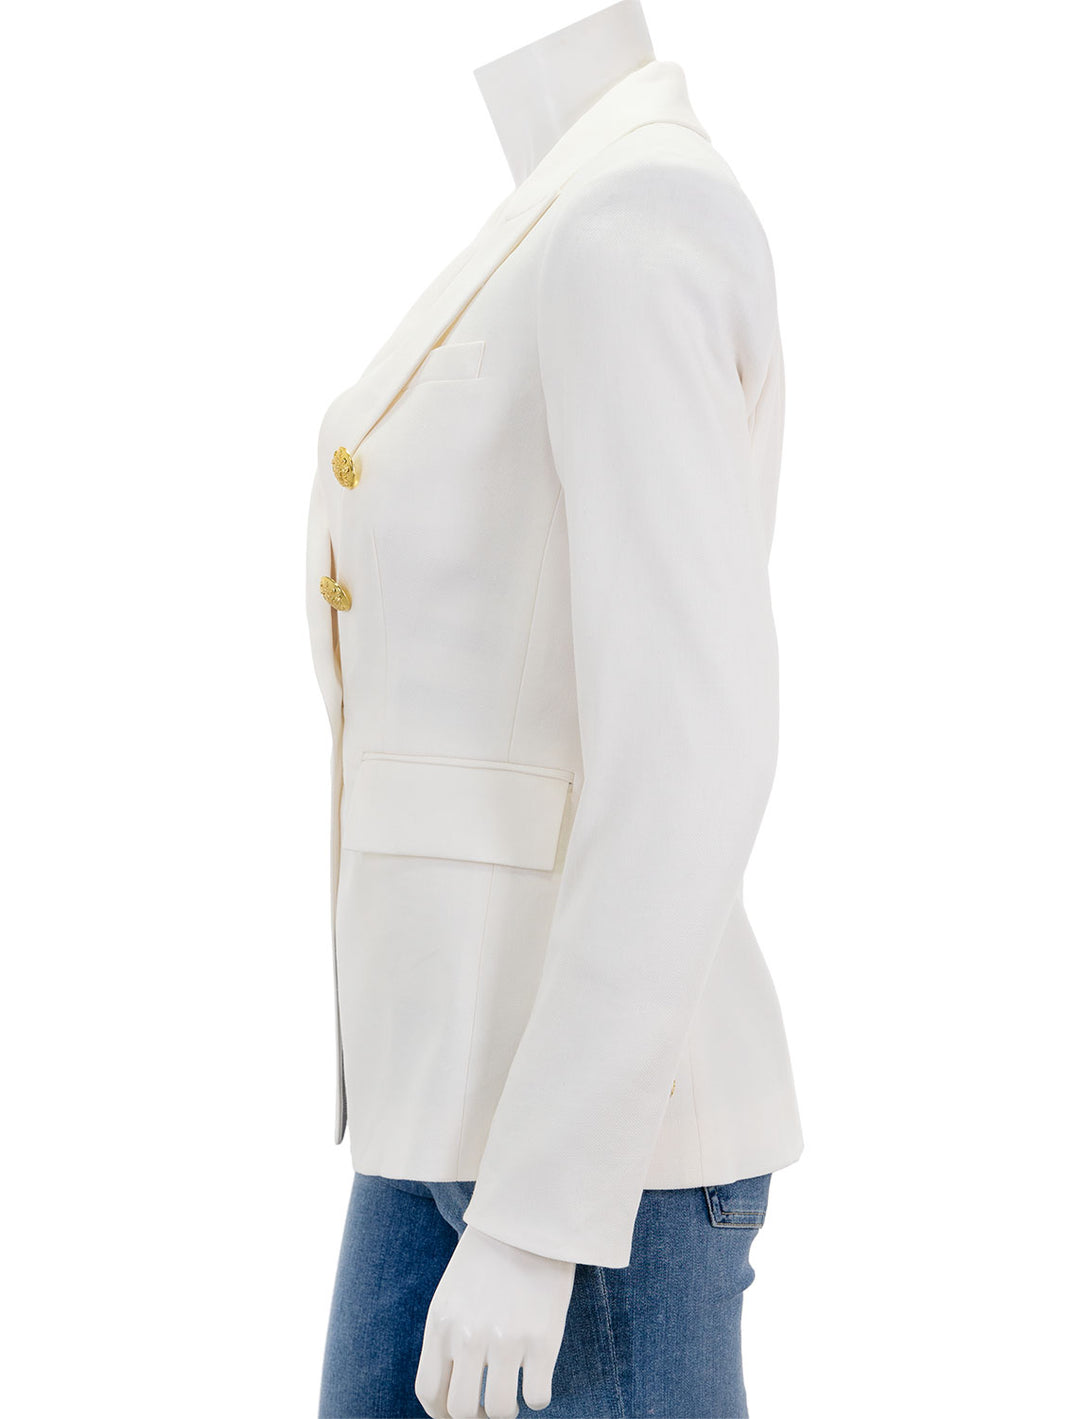 Side view of Veronica Beard's miller dickey jacket in white.